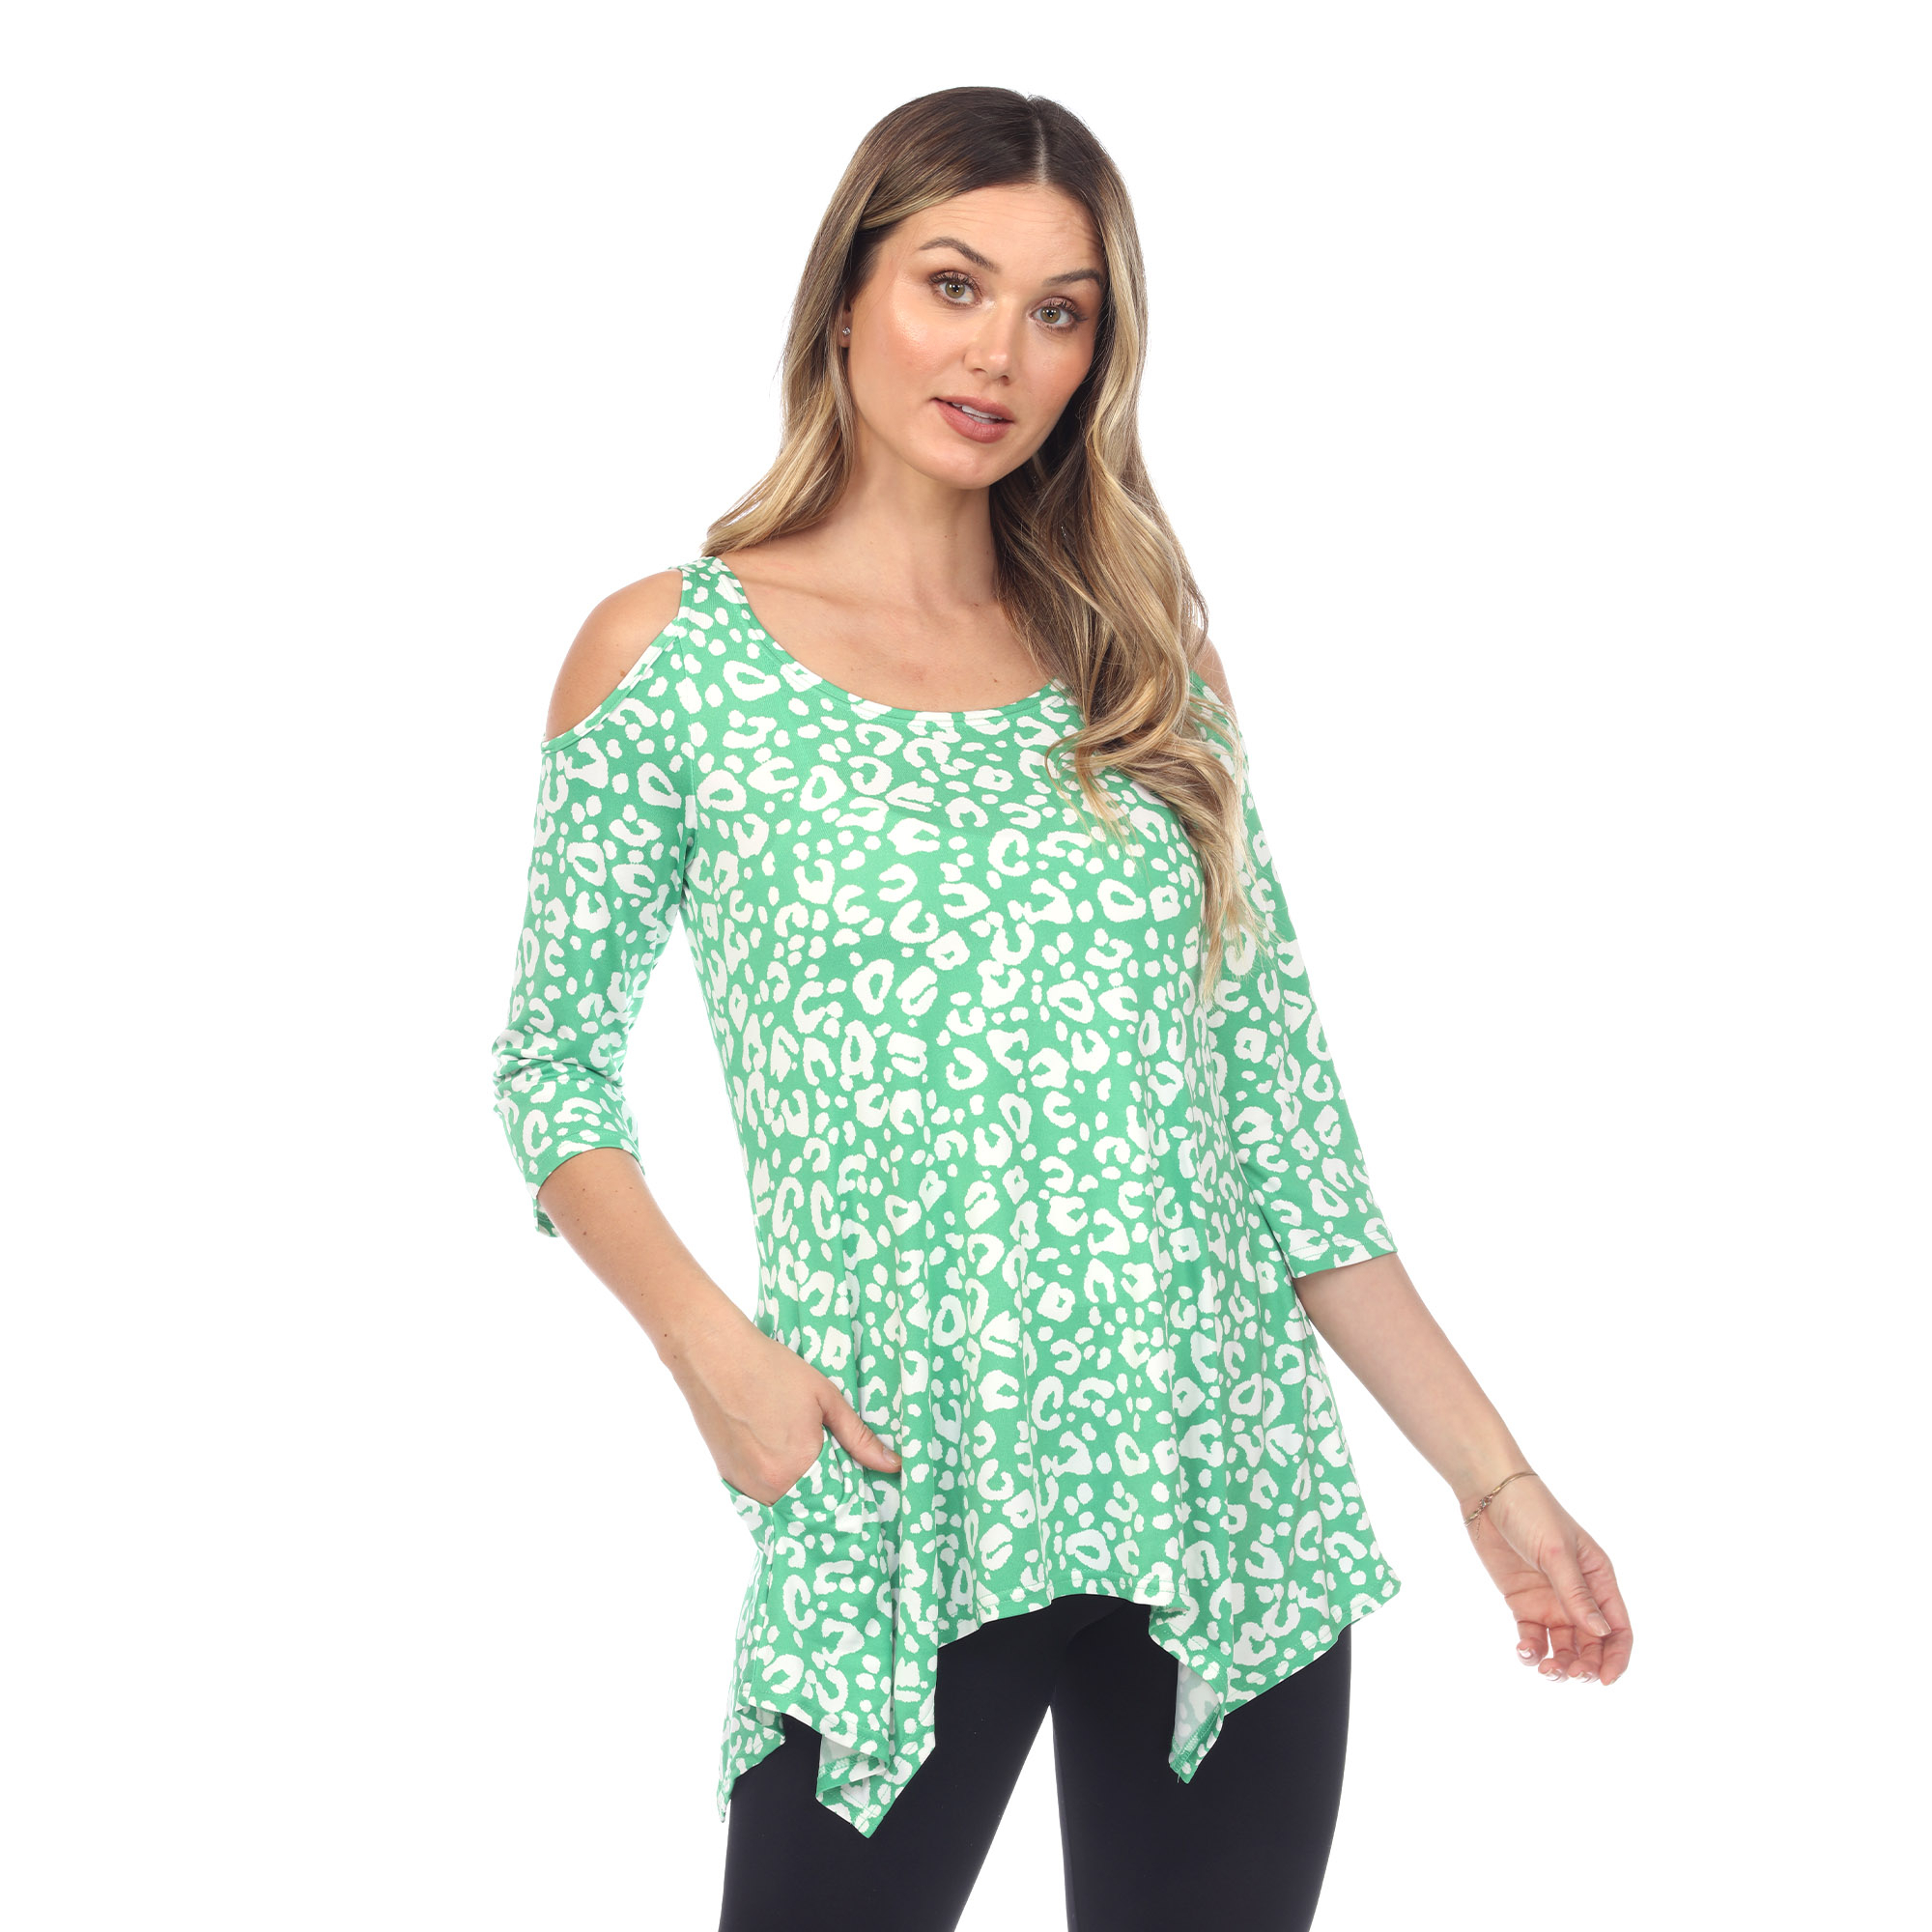 White Mark Women's Leopard Print Cold Shoulder Tunic Top With Pockets - Green, Small